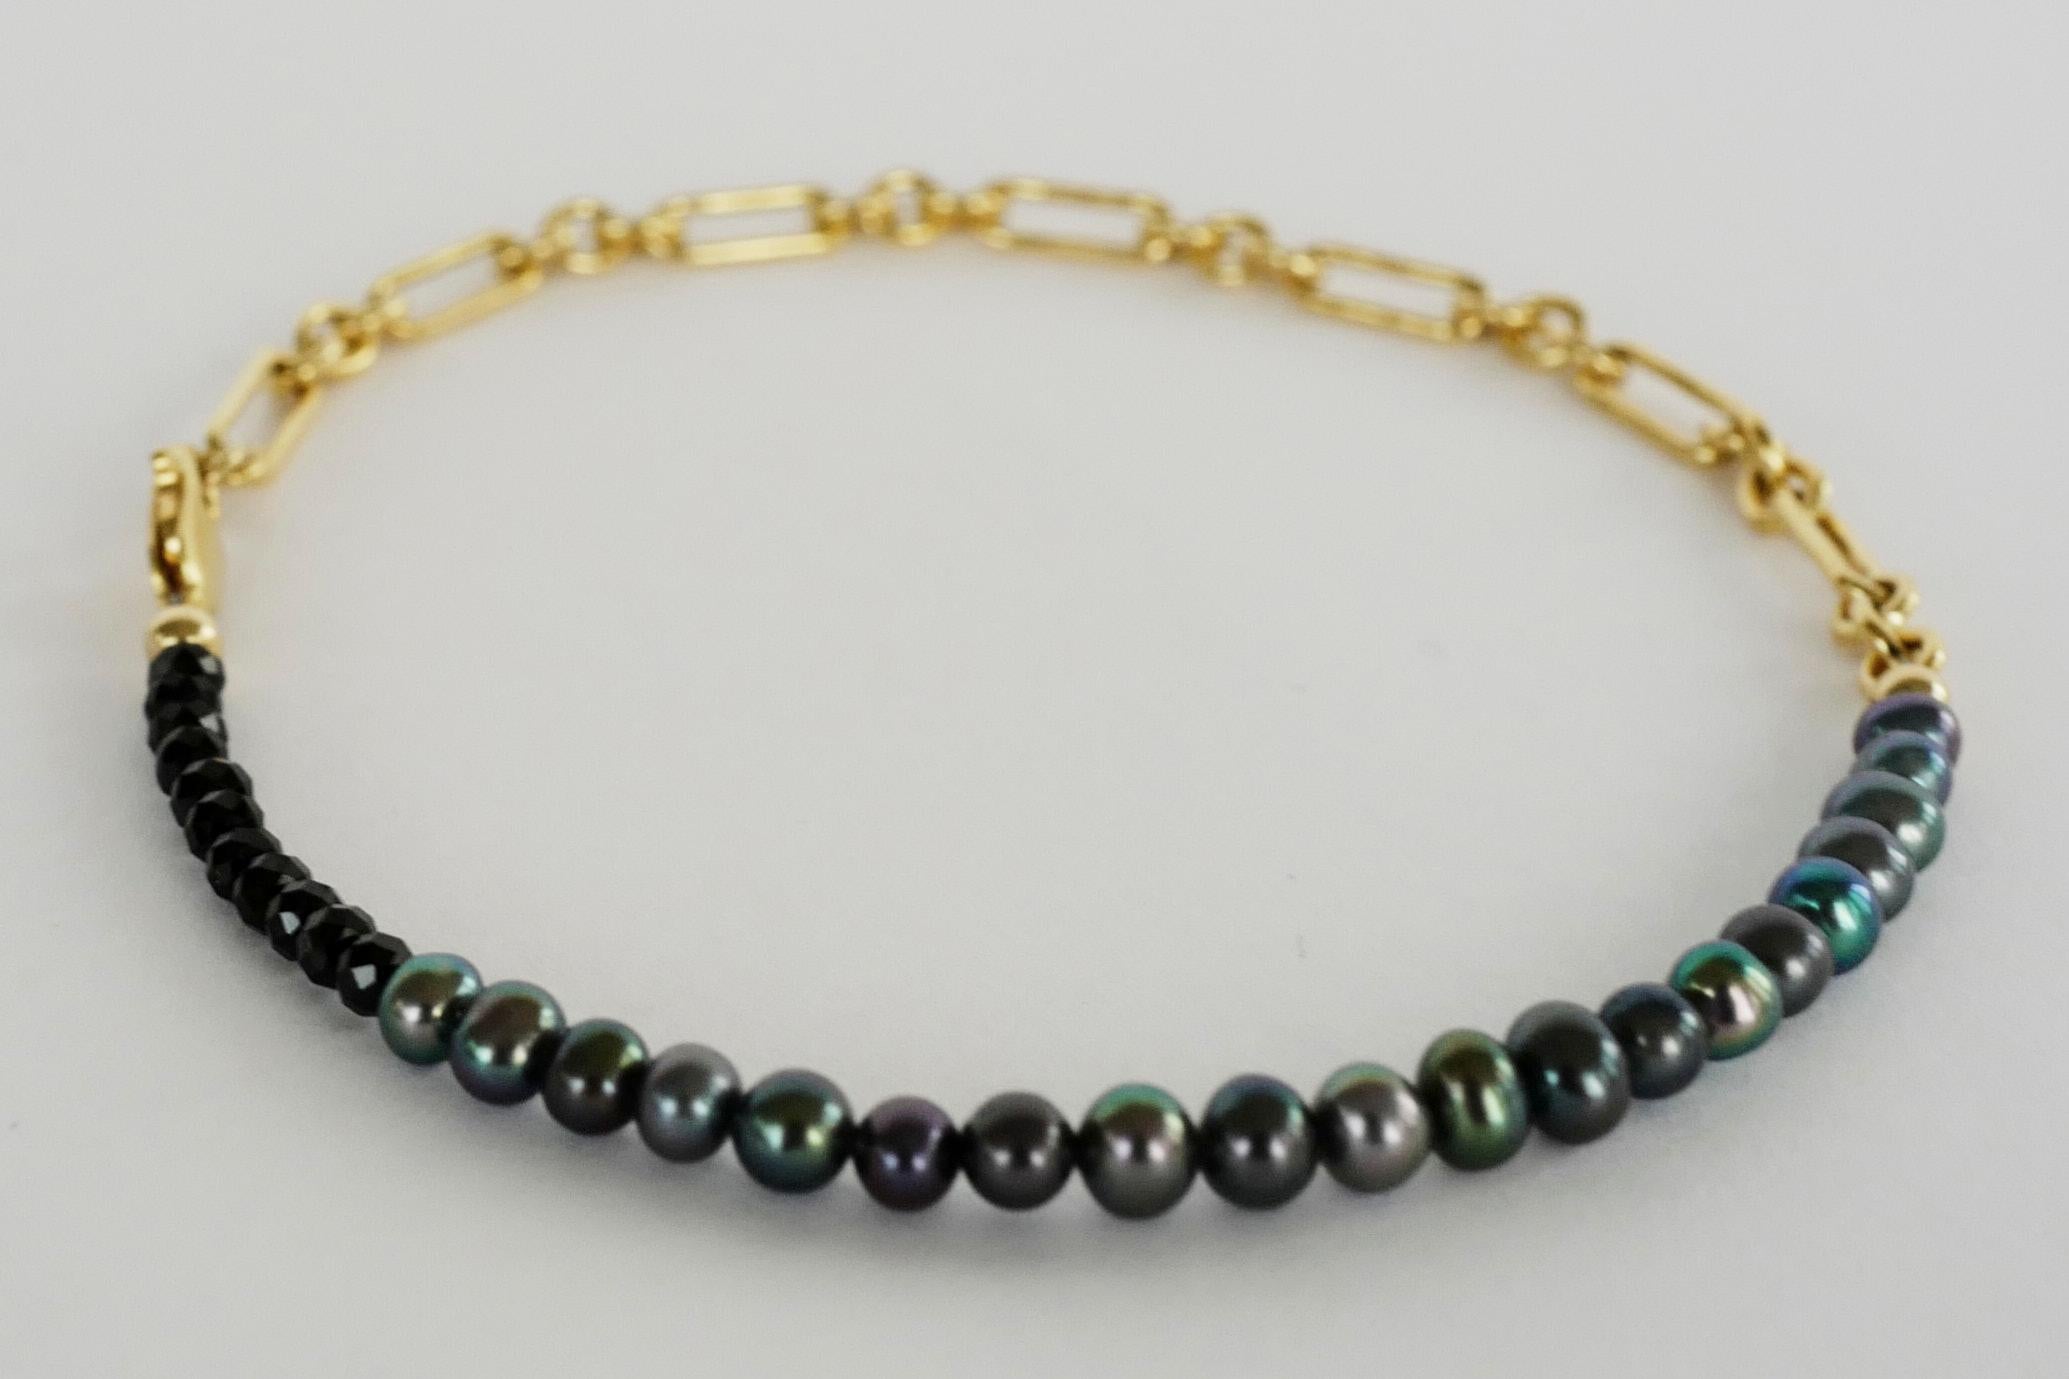 Black Pearl Beaded Choker Necklace Black Spinel Gold Filled Chain J Dauphin 1